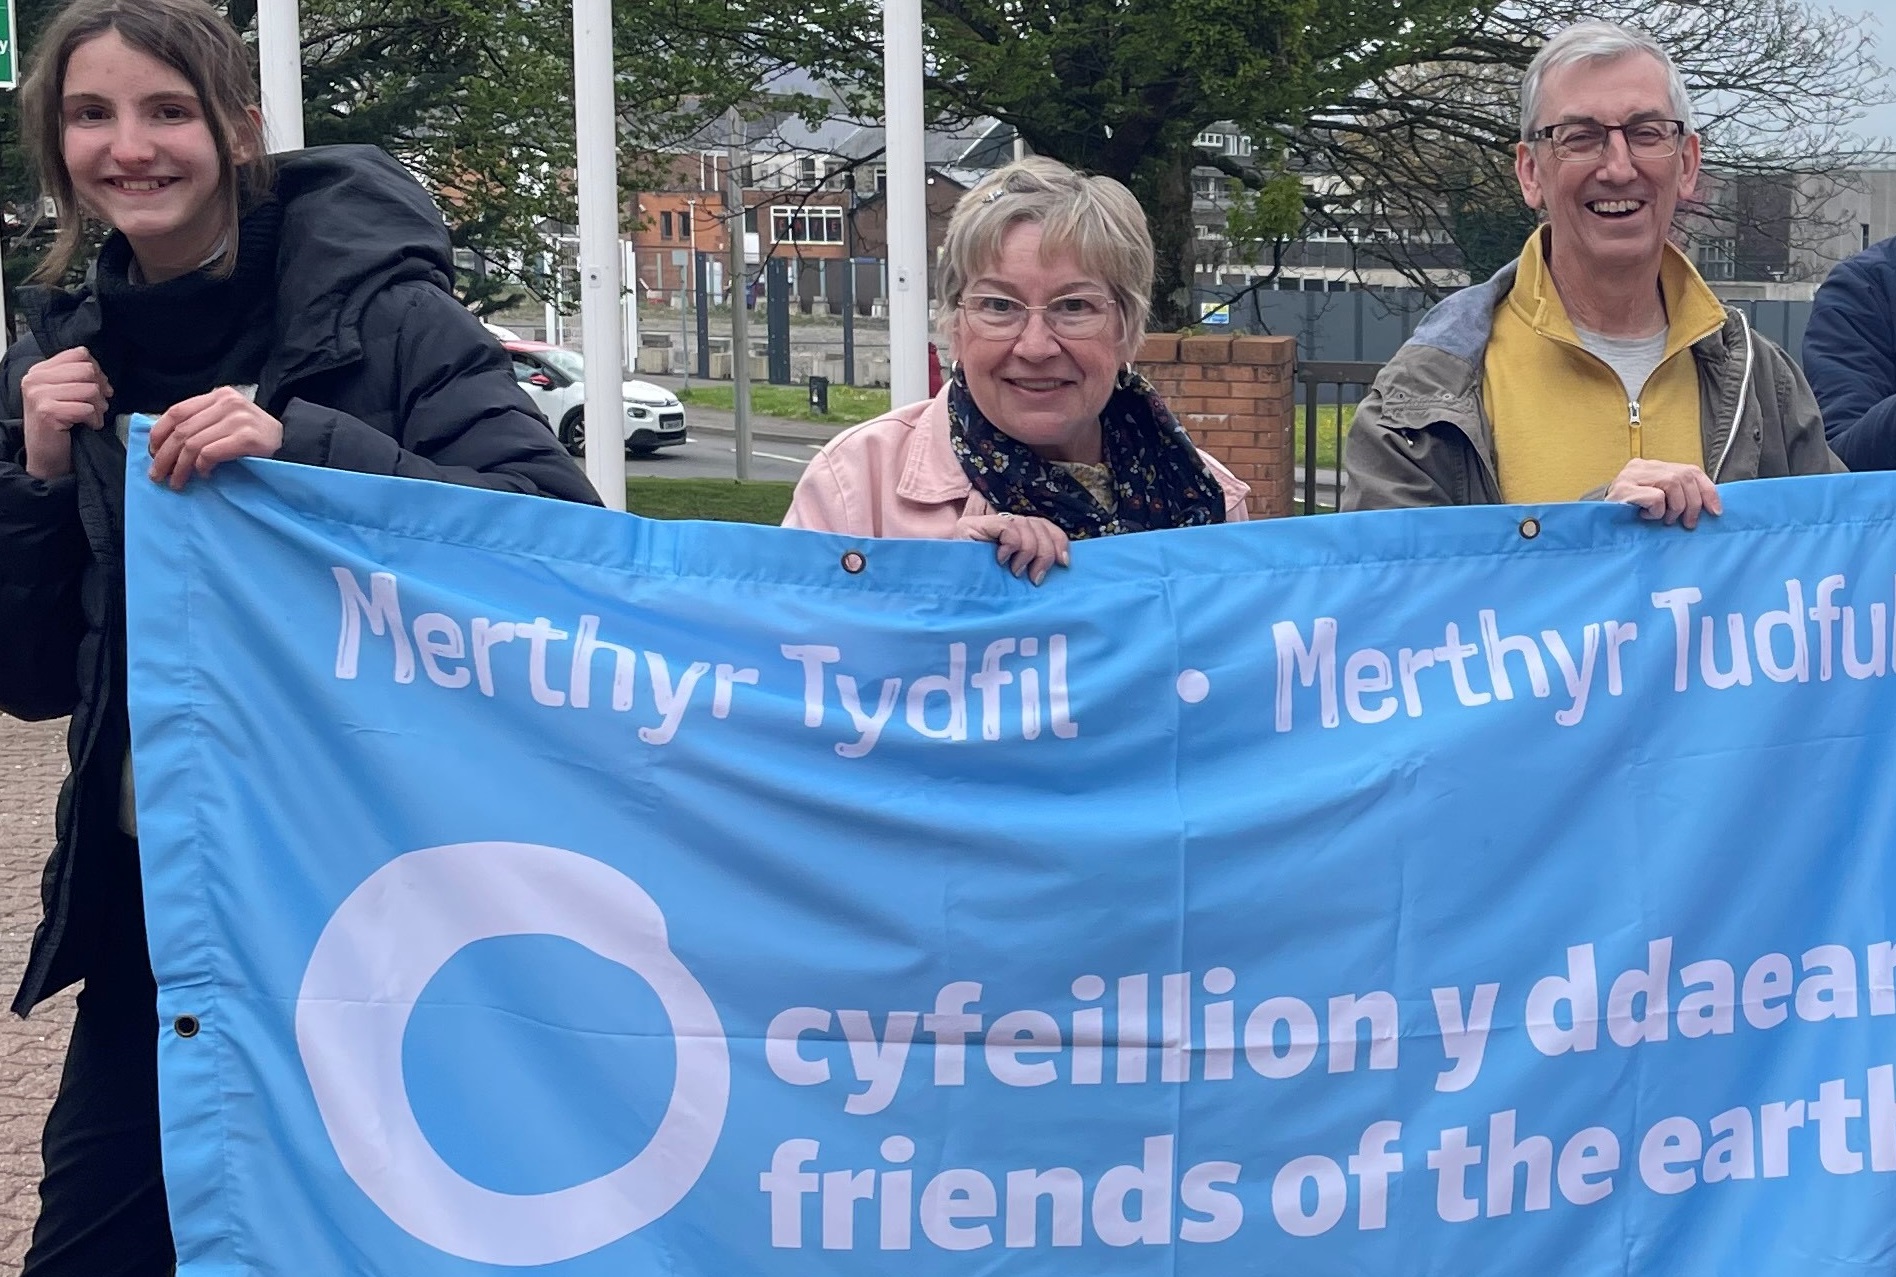 Chris and Alyson Austin from Merthyr Friends of the Earth (photo courtesy of Haf Elgar)